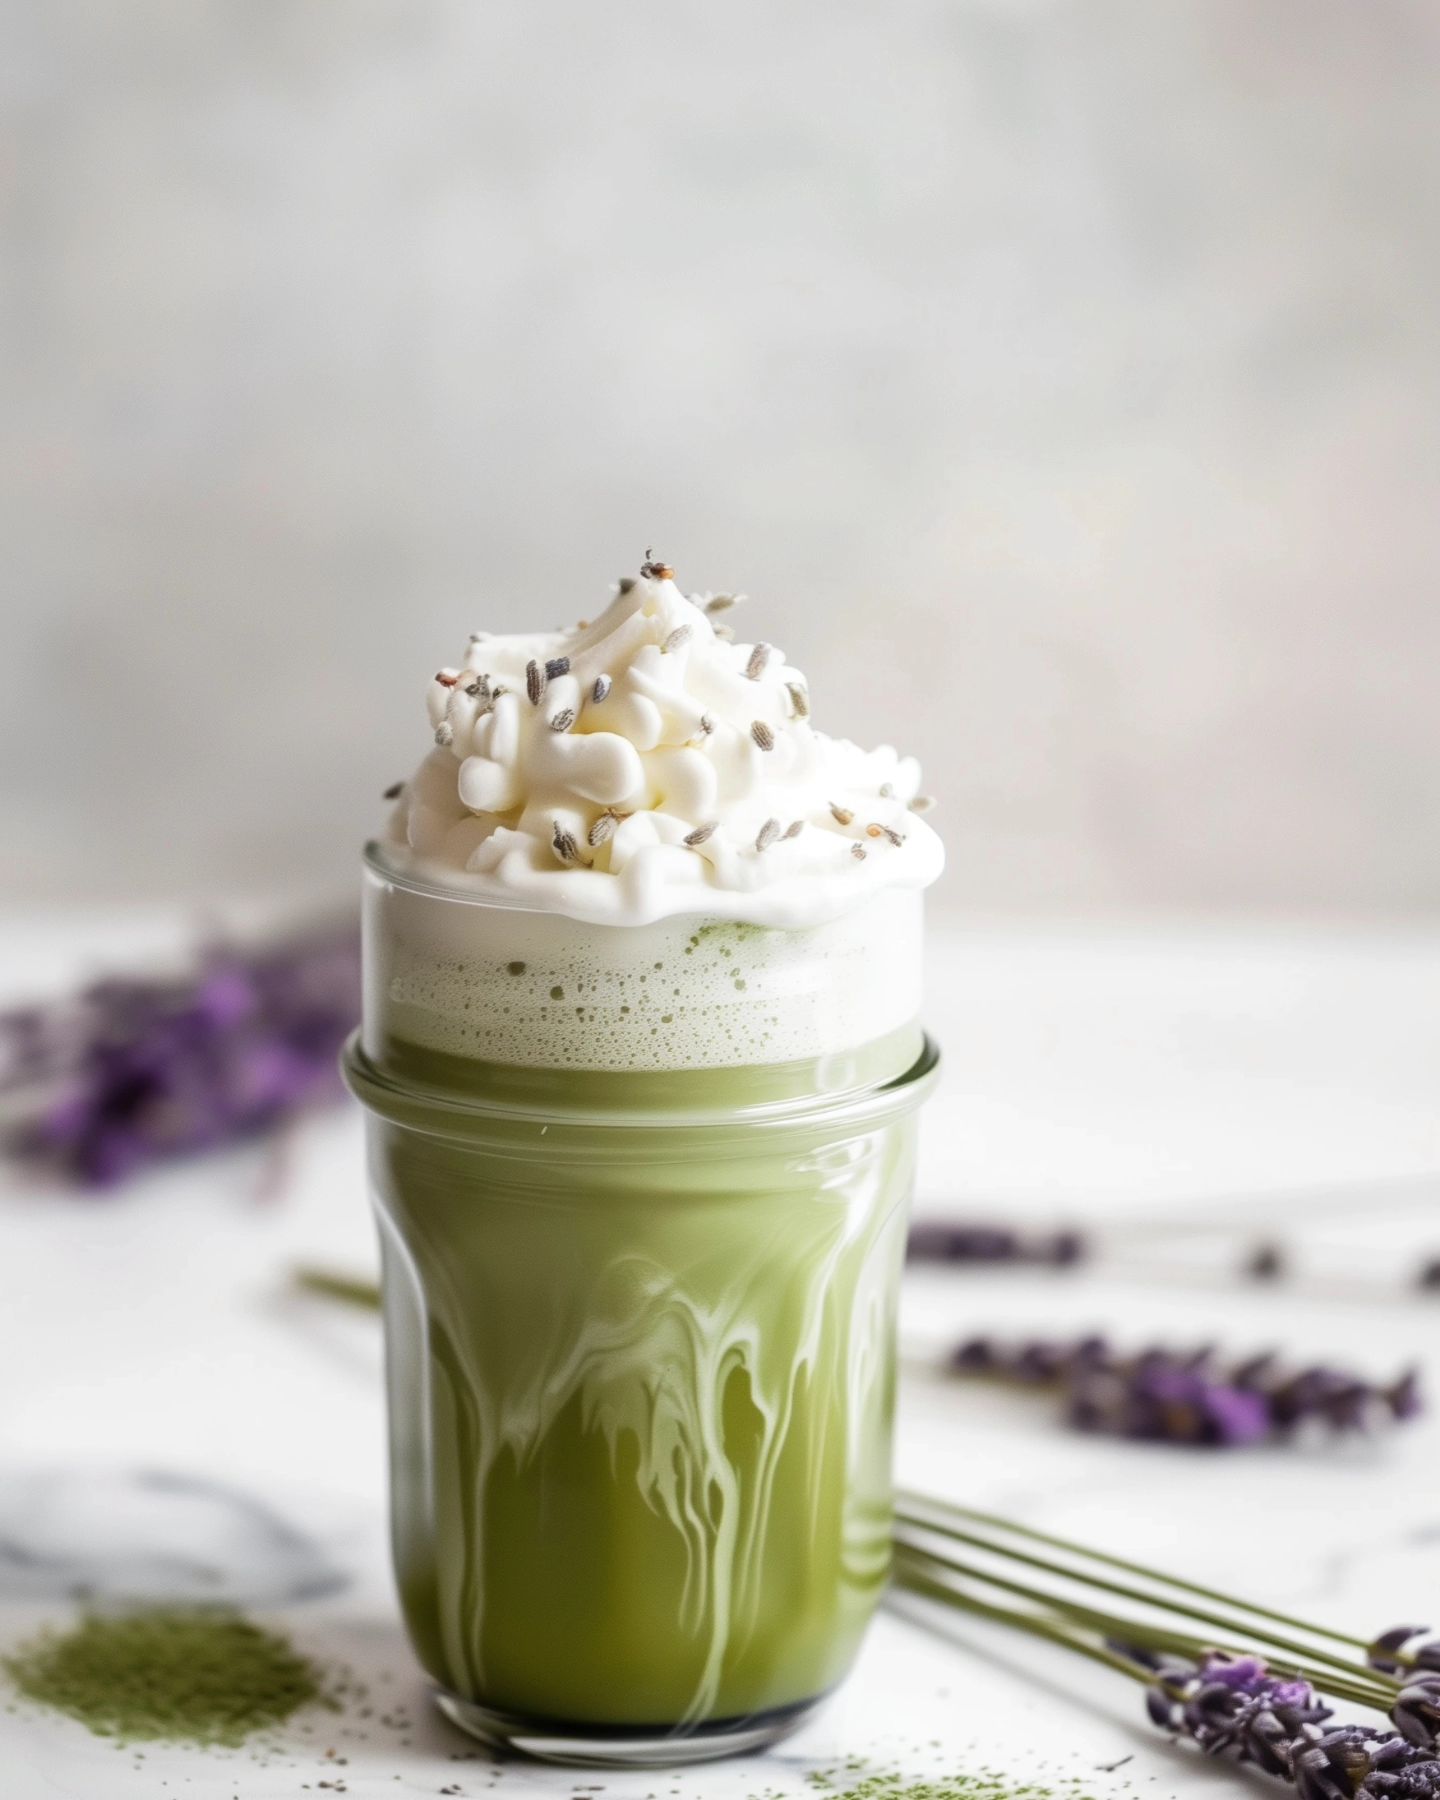 Matcha latte with lavender whipped cream-Matcha-latte-with-lavender-whipped-cream 